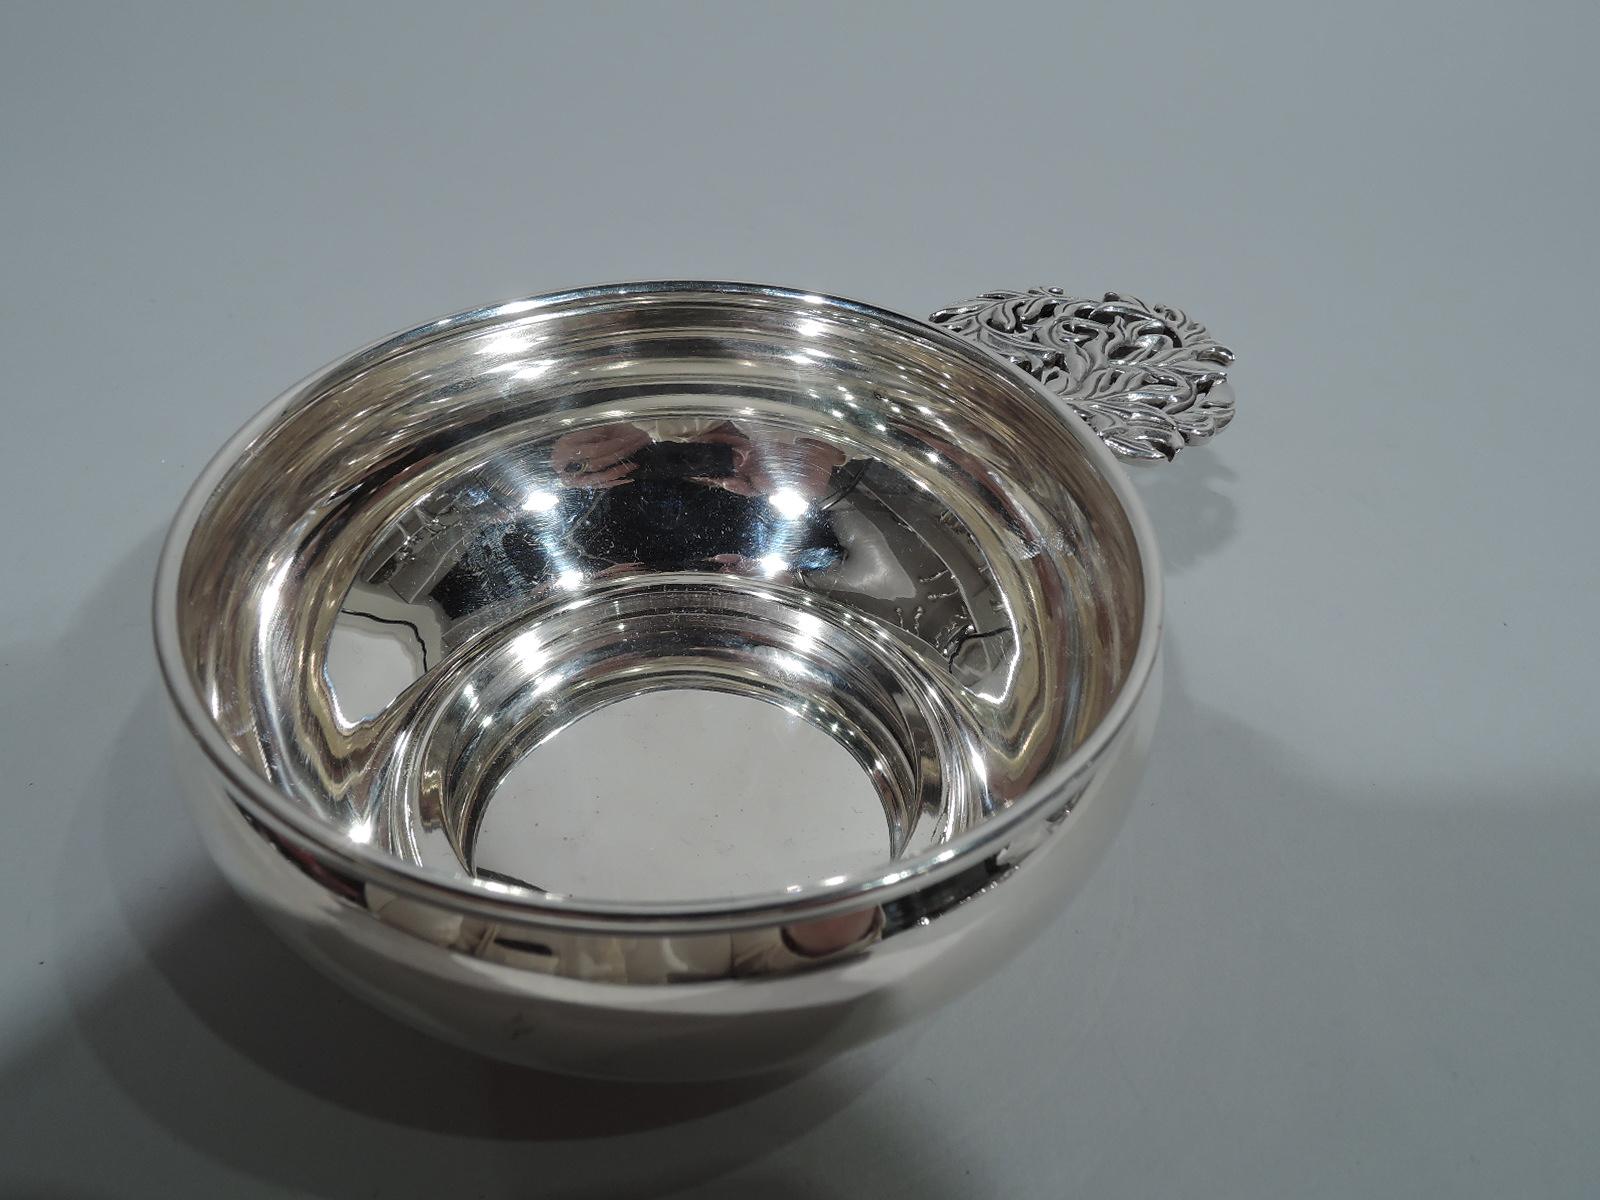 Sterling silver porringer. Made by Buccellati in Italy. Plain and curved sides. Pierced handle with tooled leaves. A stylish baby with plenty of room for engraving. Fully marked including maker’s and retailer’s (Isabella Stewart Gardner Museum)